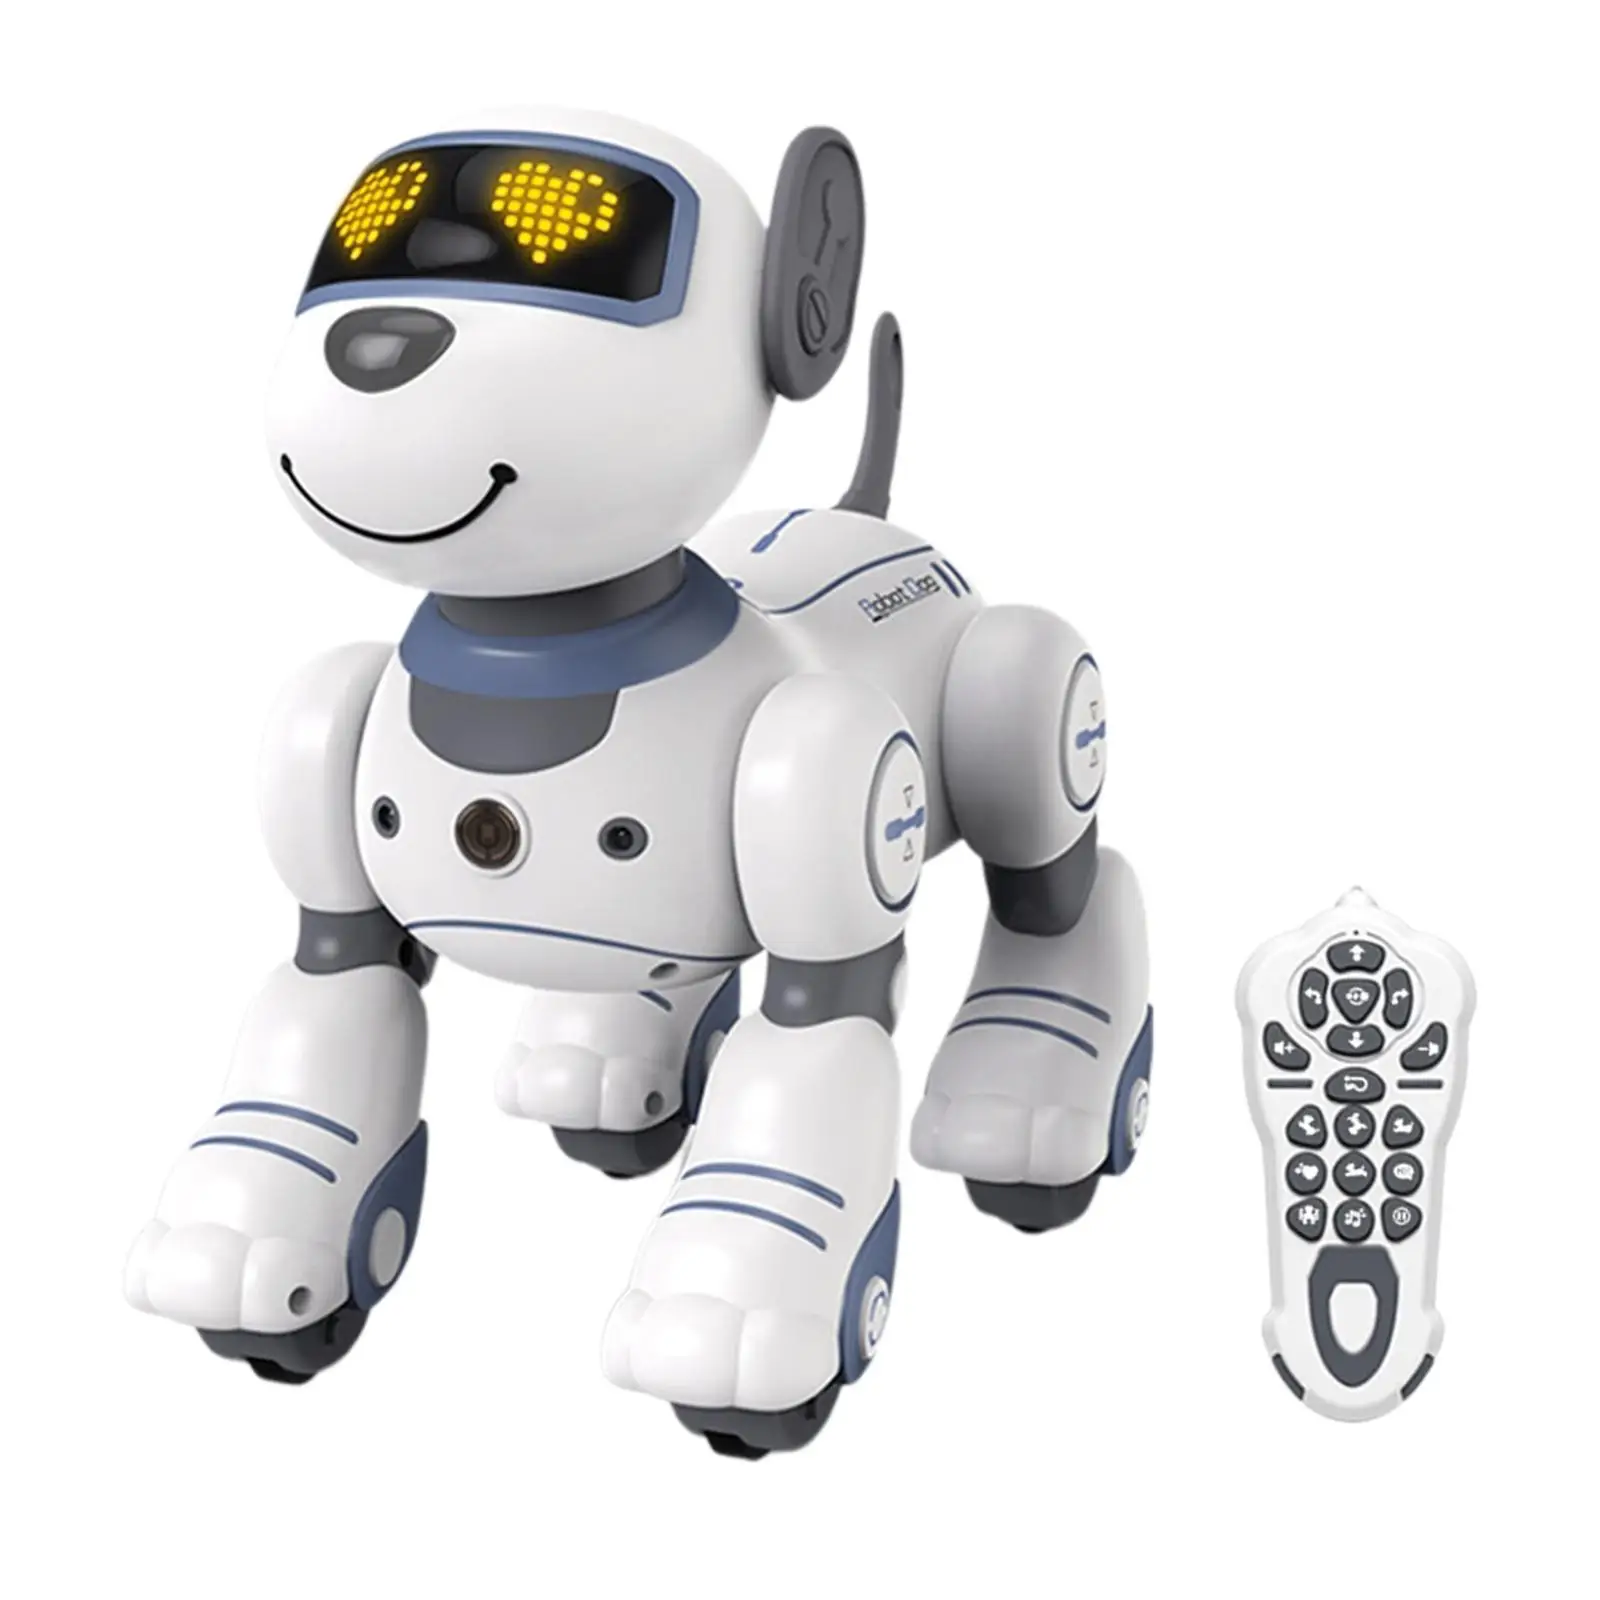 Robot Dog Toy Toys Remote Control Electronic Toys Robotic Pet Toy for Children`s All Ages Boys and Girls Boys Girls Baby